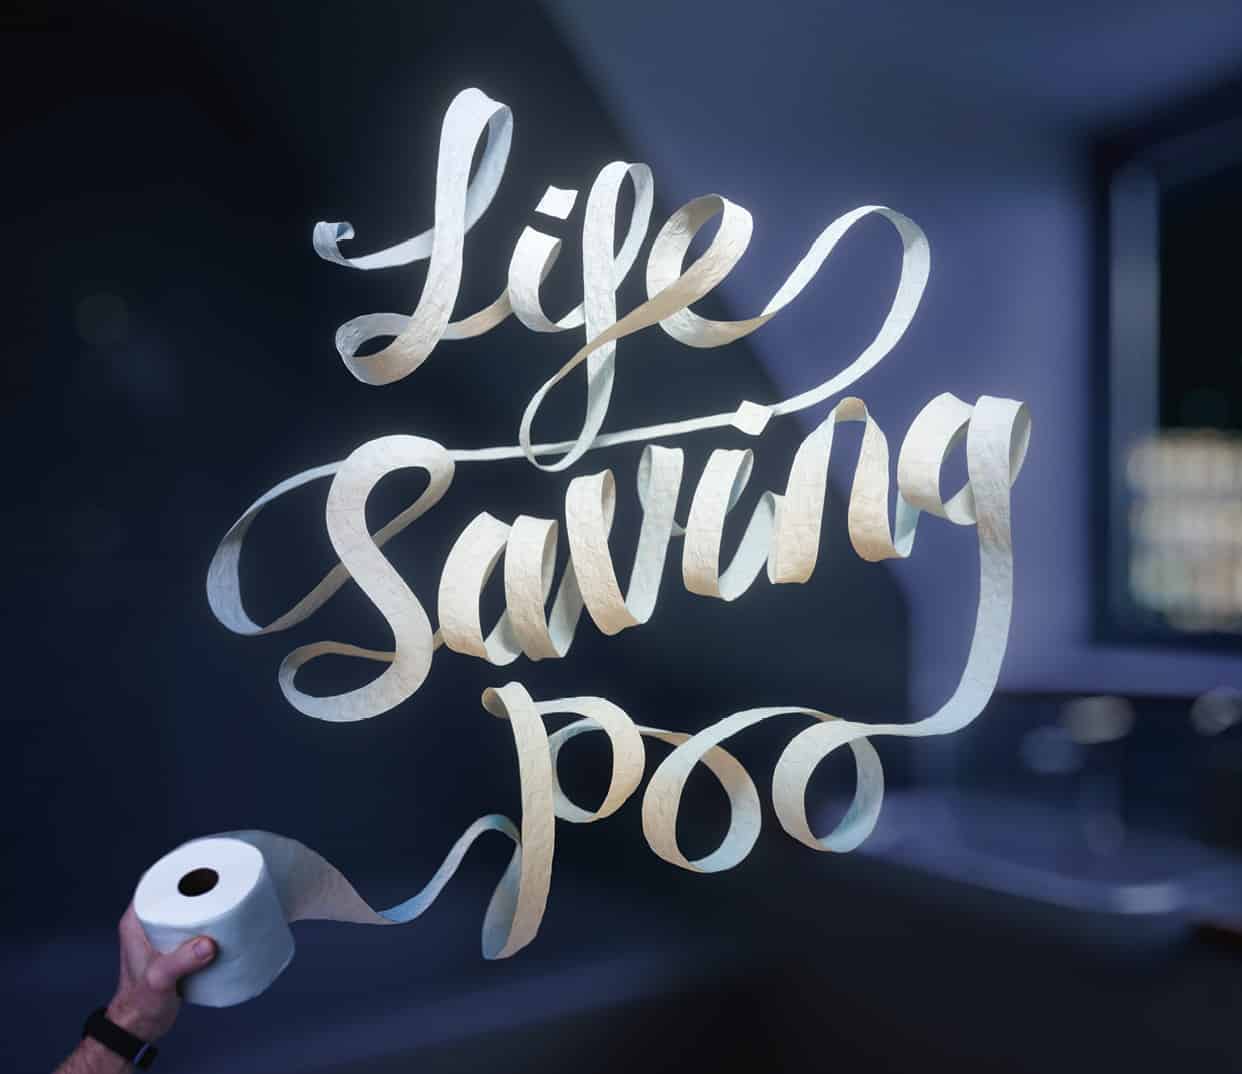 picture of the words life saving poo spelt out in toilet roll